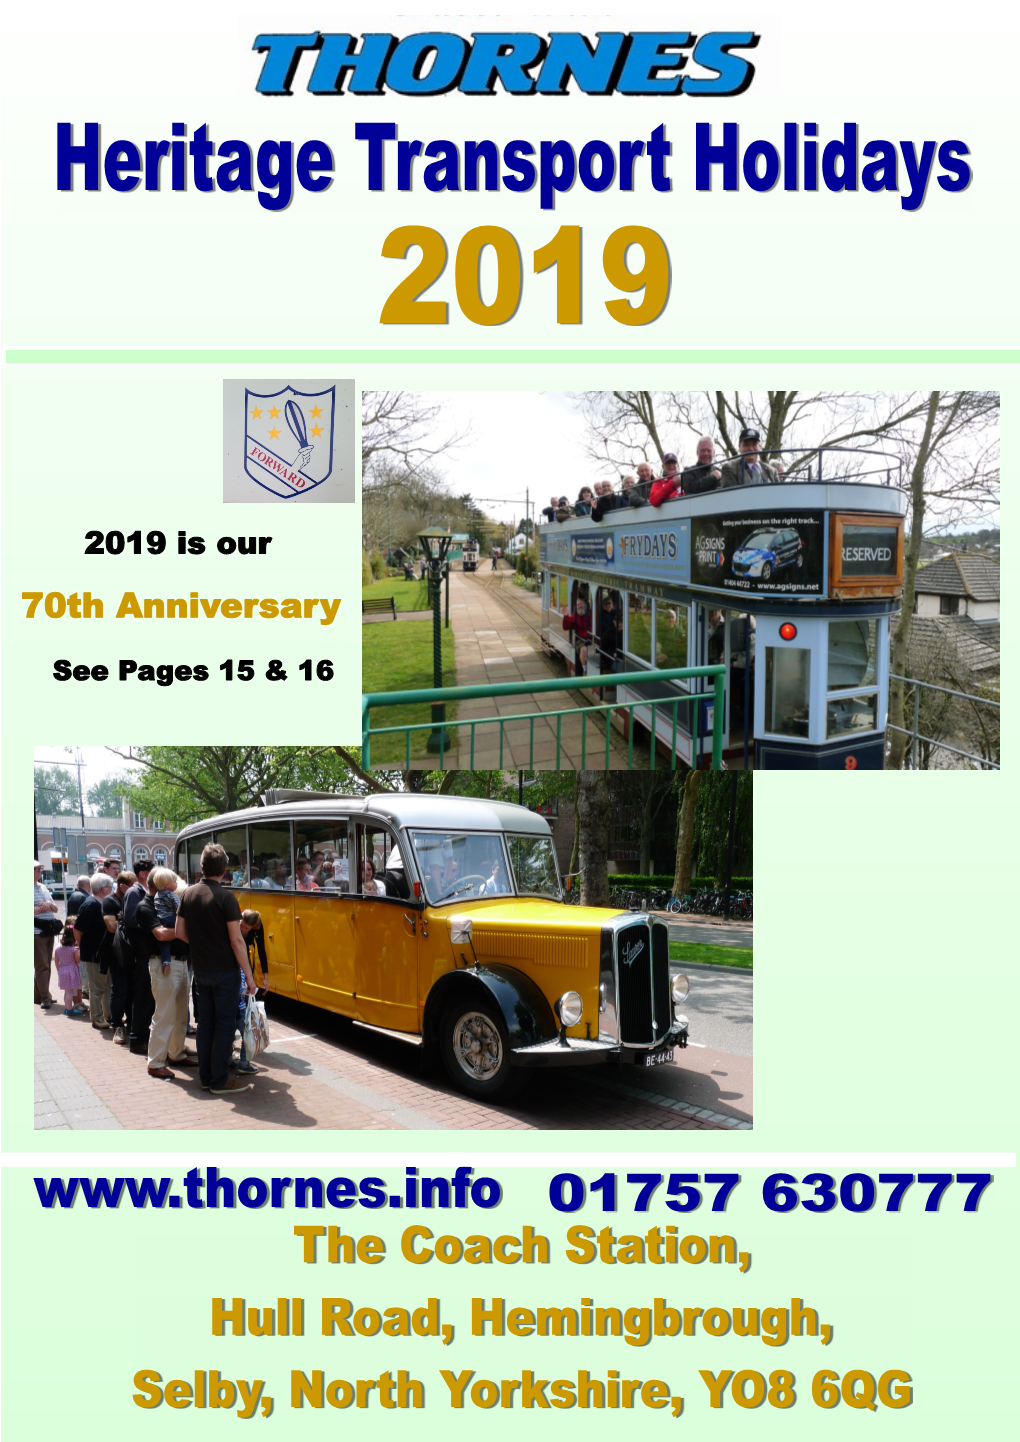 THORNES INDEPENDENT LIMITED the Coach Station Hull Road Hemingbrough Selby North Yorkshire YO8 6QG